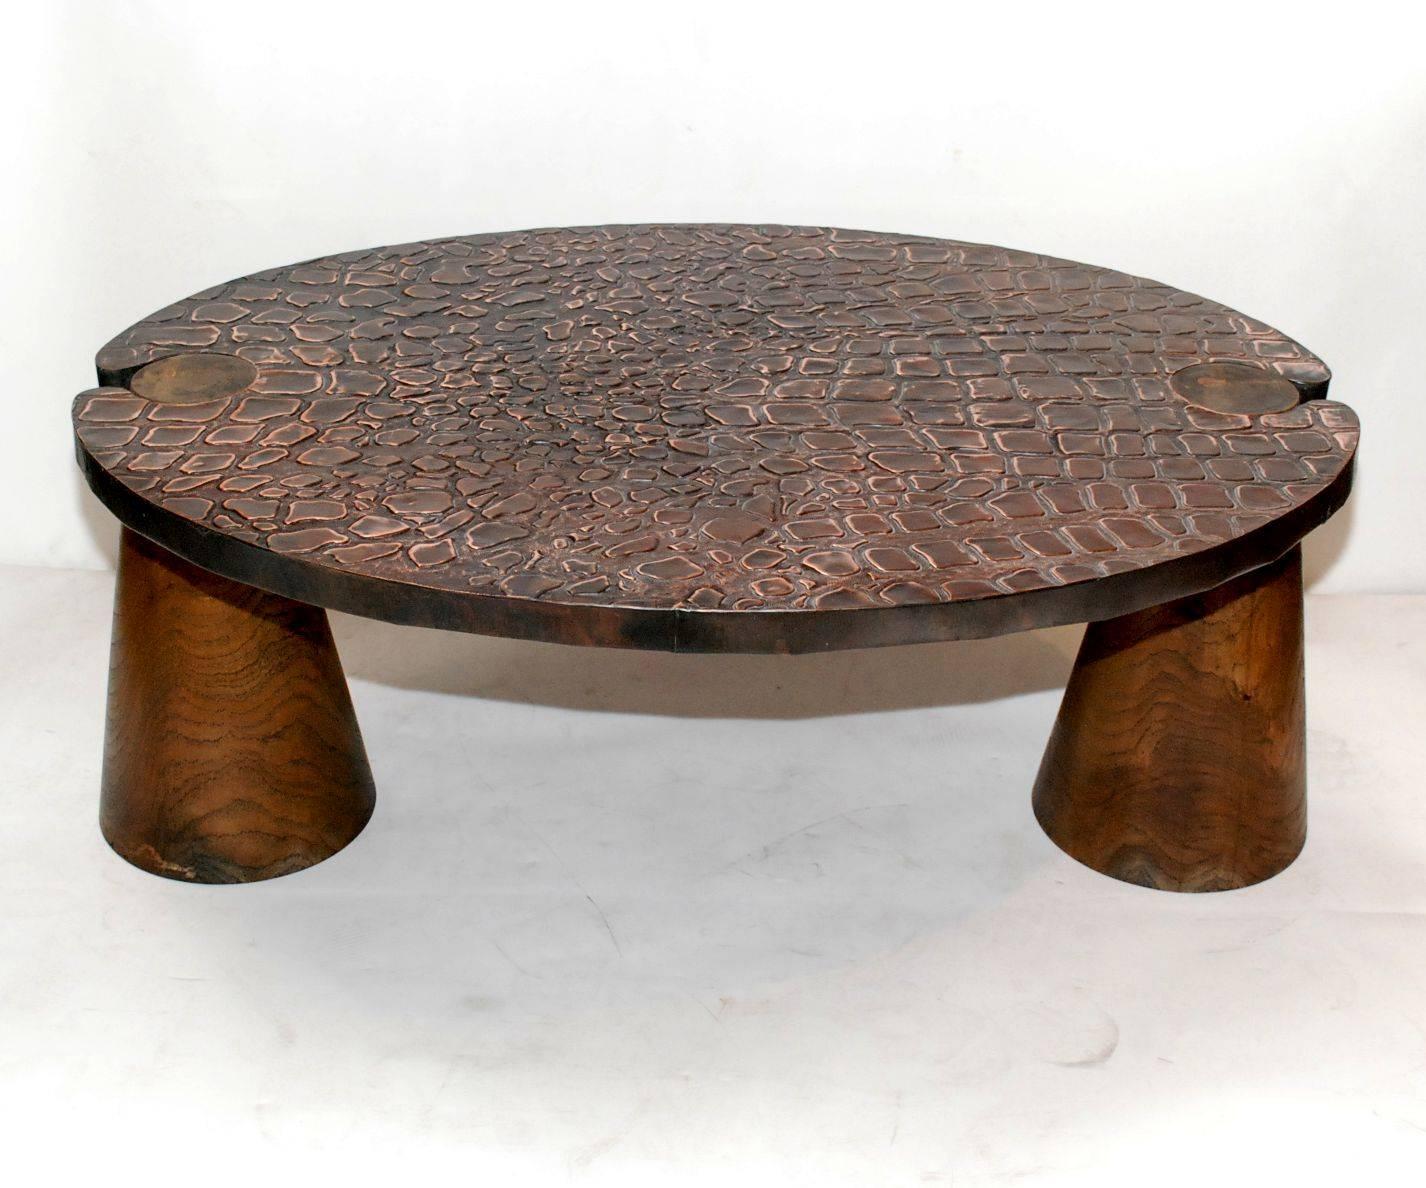 Solid wood legs coffee table with turtle copper design top.